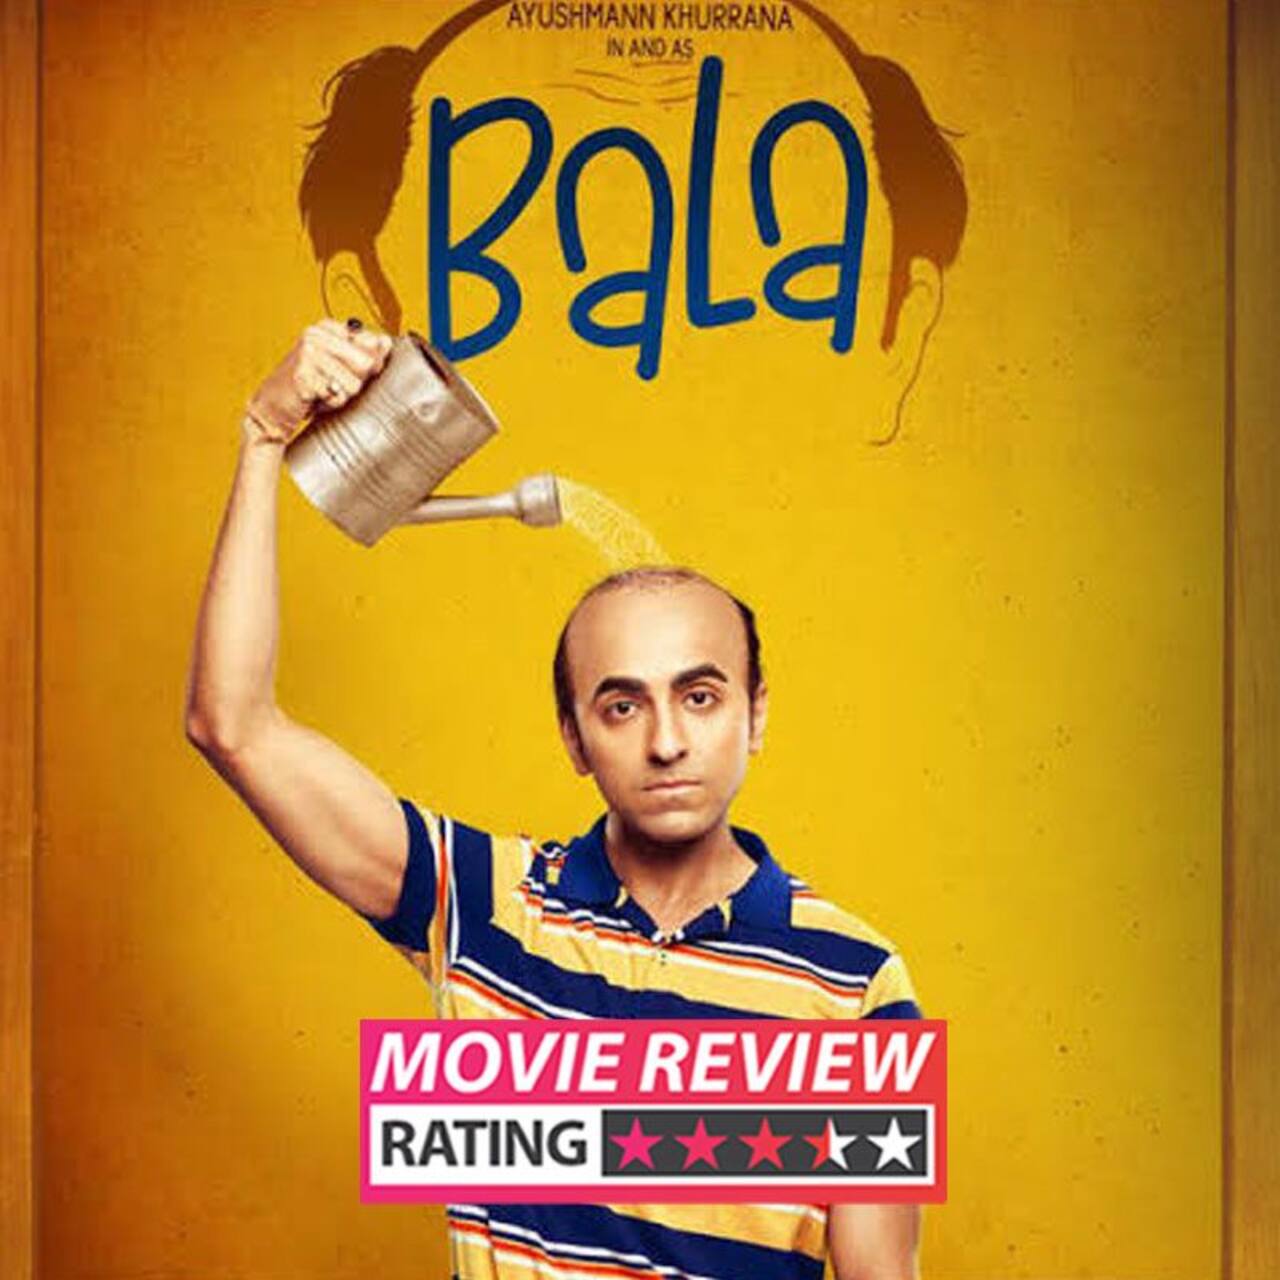 Bala movie review: Ayushmann Khurrana and his 'bald' wisecracks will leave you clean bowled